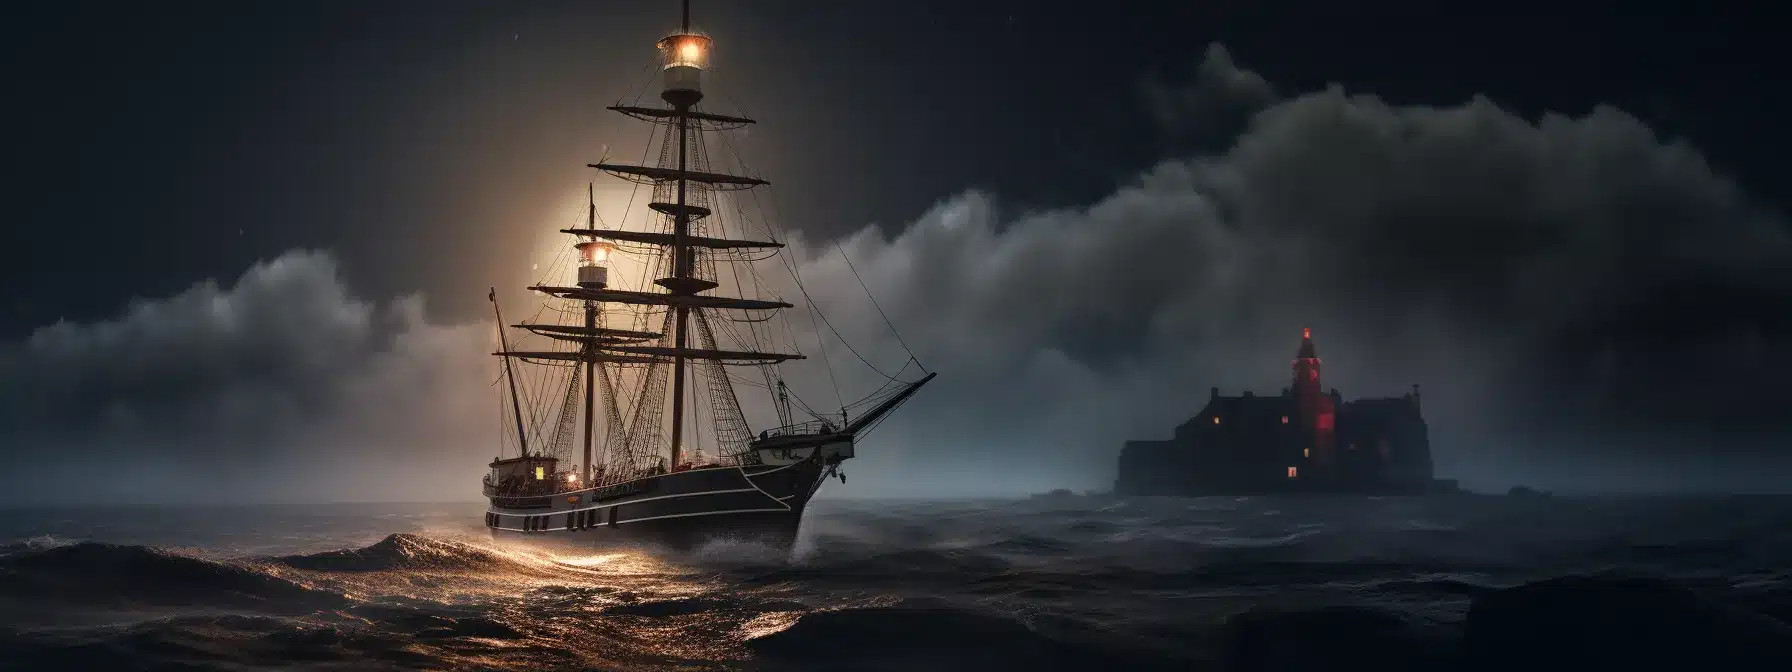 A Ship Sailing Towards A Lighthouse In The Dark Night.